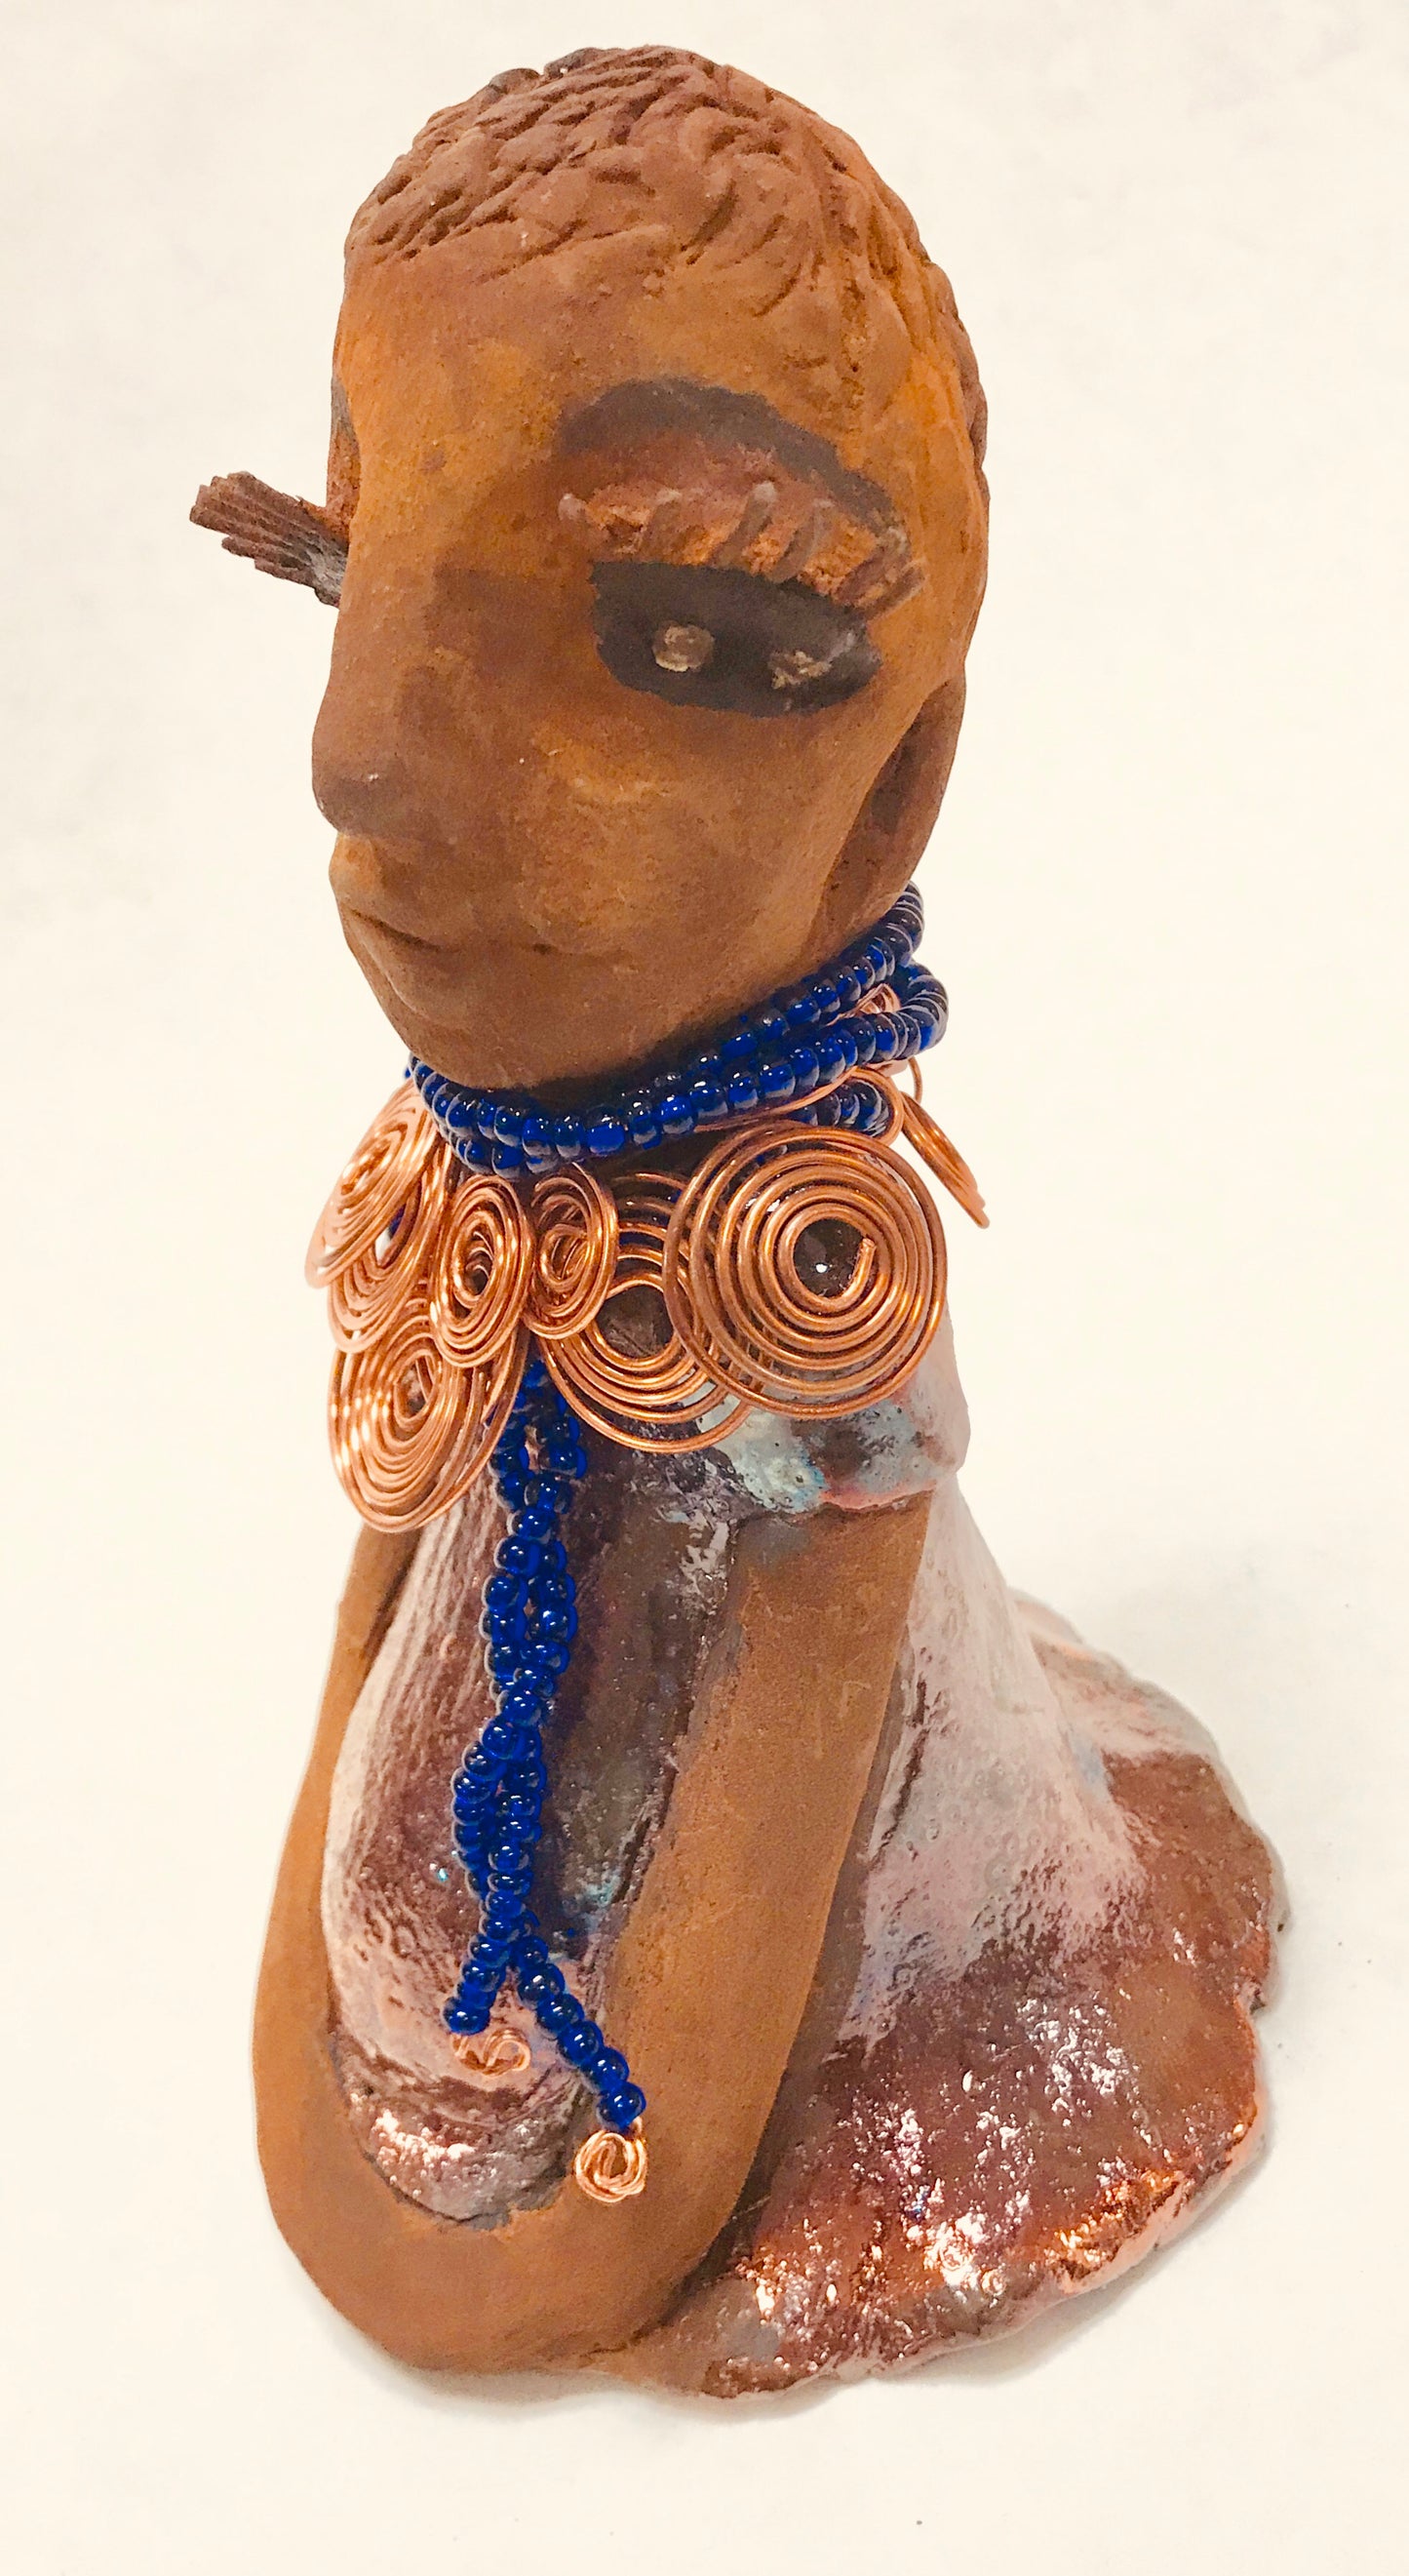 Tattayana stands 8" x 4.5" x 5" and weighs 1.02  lbs. She has a lovely honey brown complexion with reddish brTattayanaown lips. She has a short braided hairstyle.  Tattayana has a colorful metallic antique copper glazed dress. She wears spiral copper wire necklaces on top of an aqua blue beaded collar.  Tattayana has her long loving arms rest at her side. With eyes wide opened,Tattayana  has hopes of finding a new home.